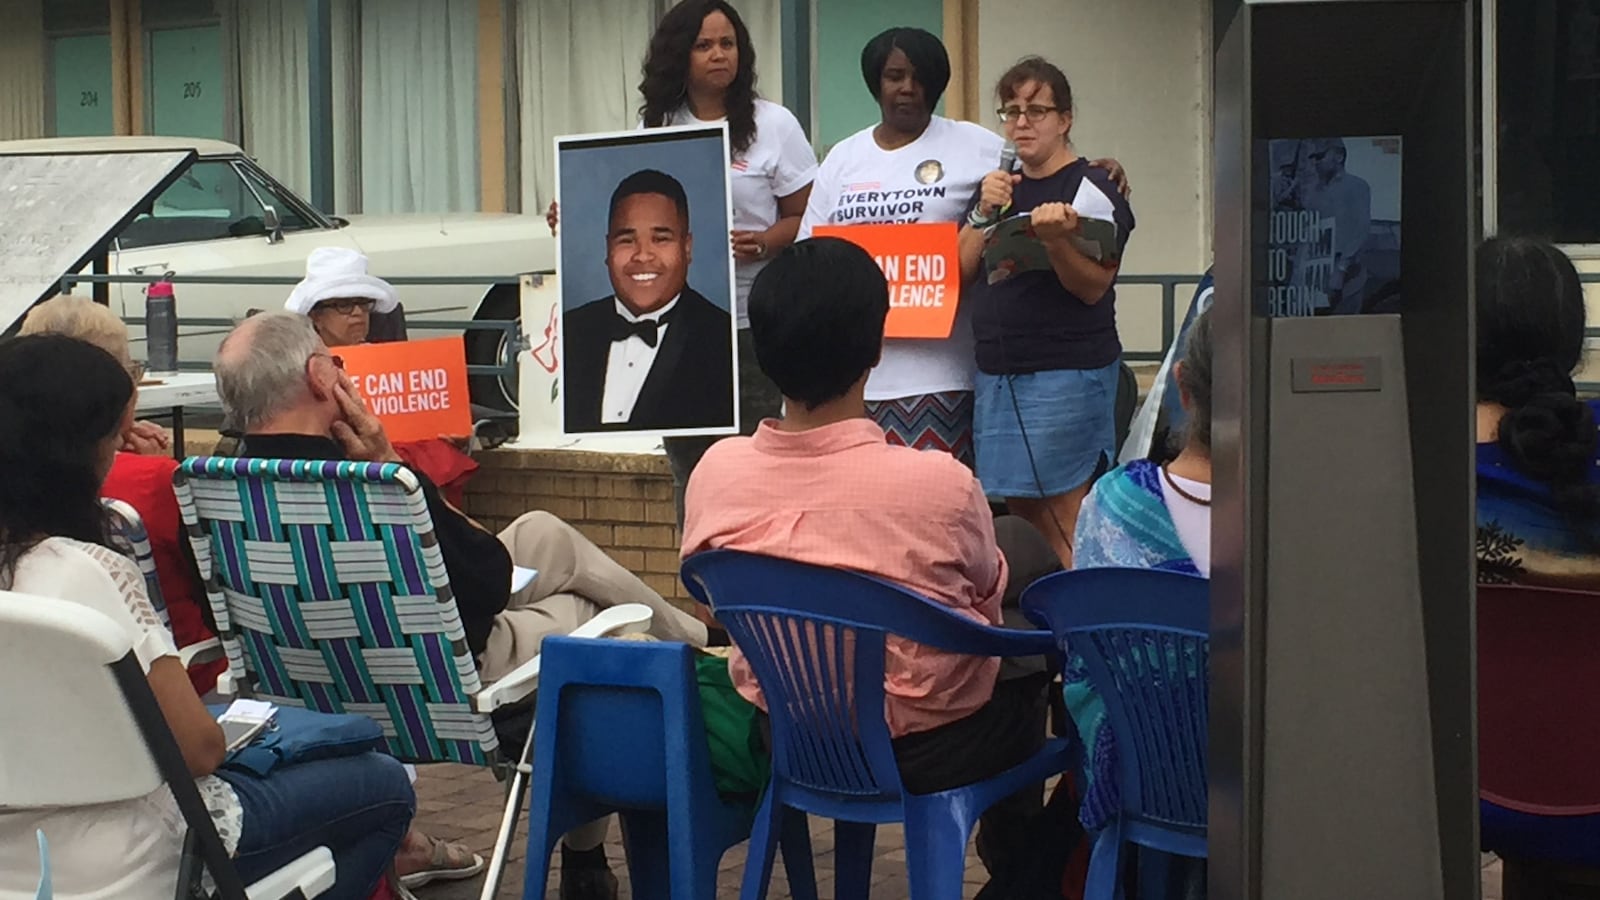 Kat McRitchie, at right, appeared with mothers who lost children to gun violence at a rally outside the National Civil Rights Museum. Photo courtesy Kat McRitchie.